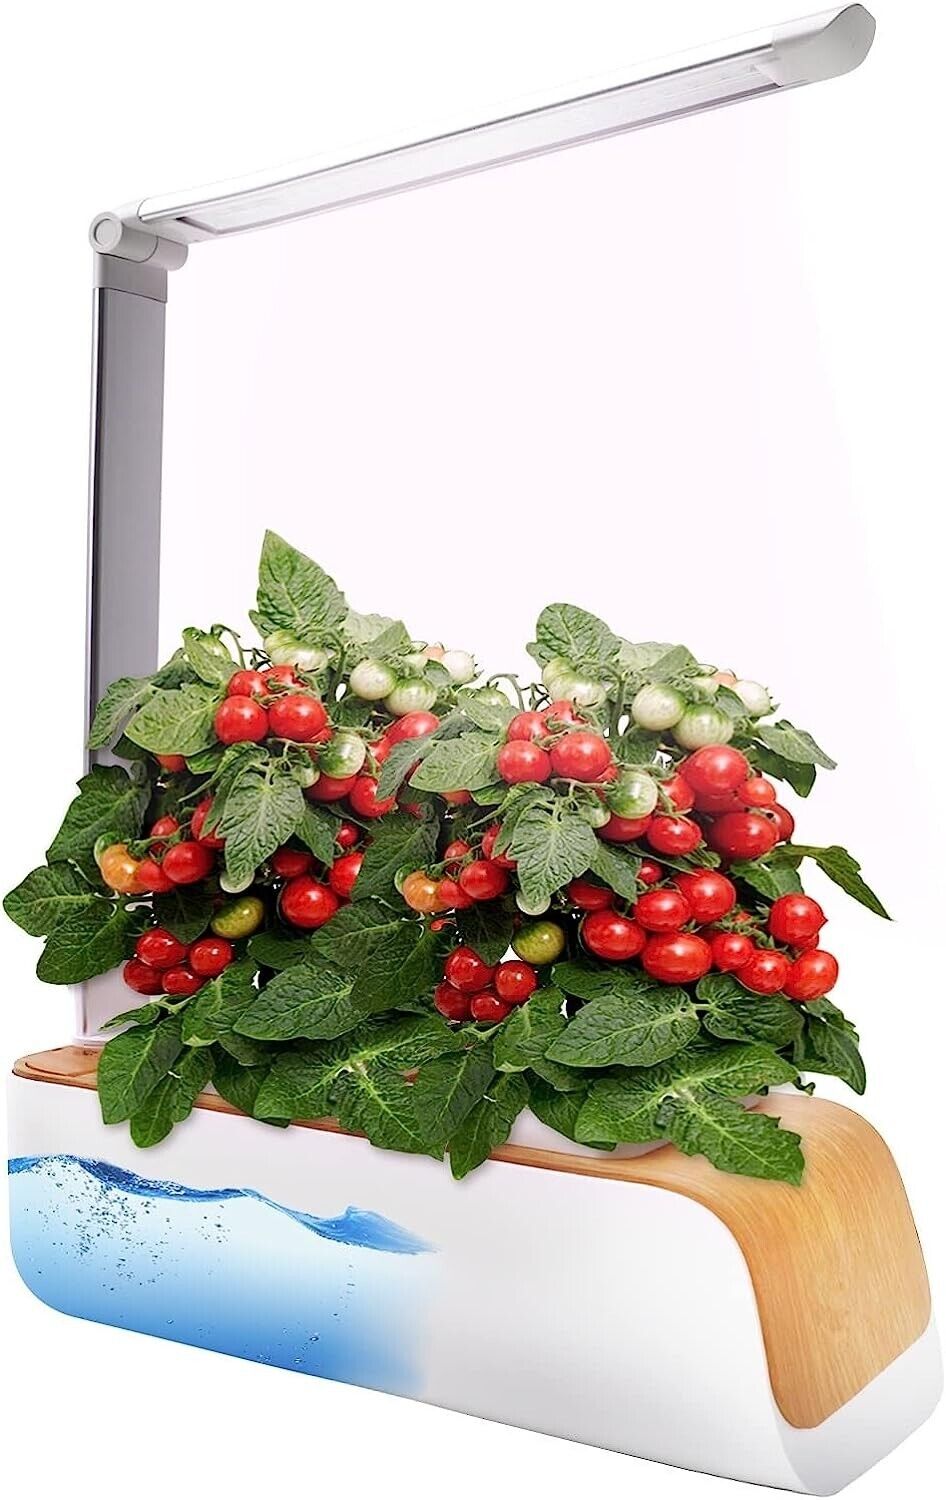 LED Grow Light Indoor Herb Garden Hydroponics Growing System Timer